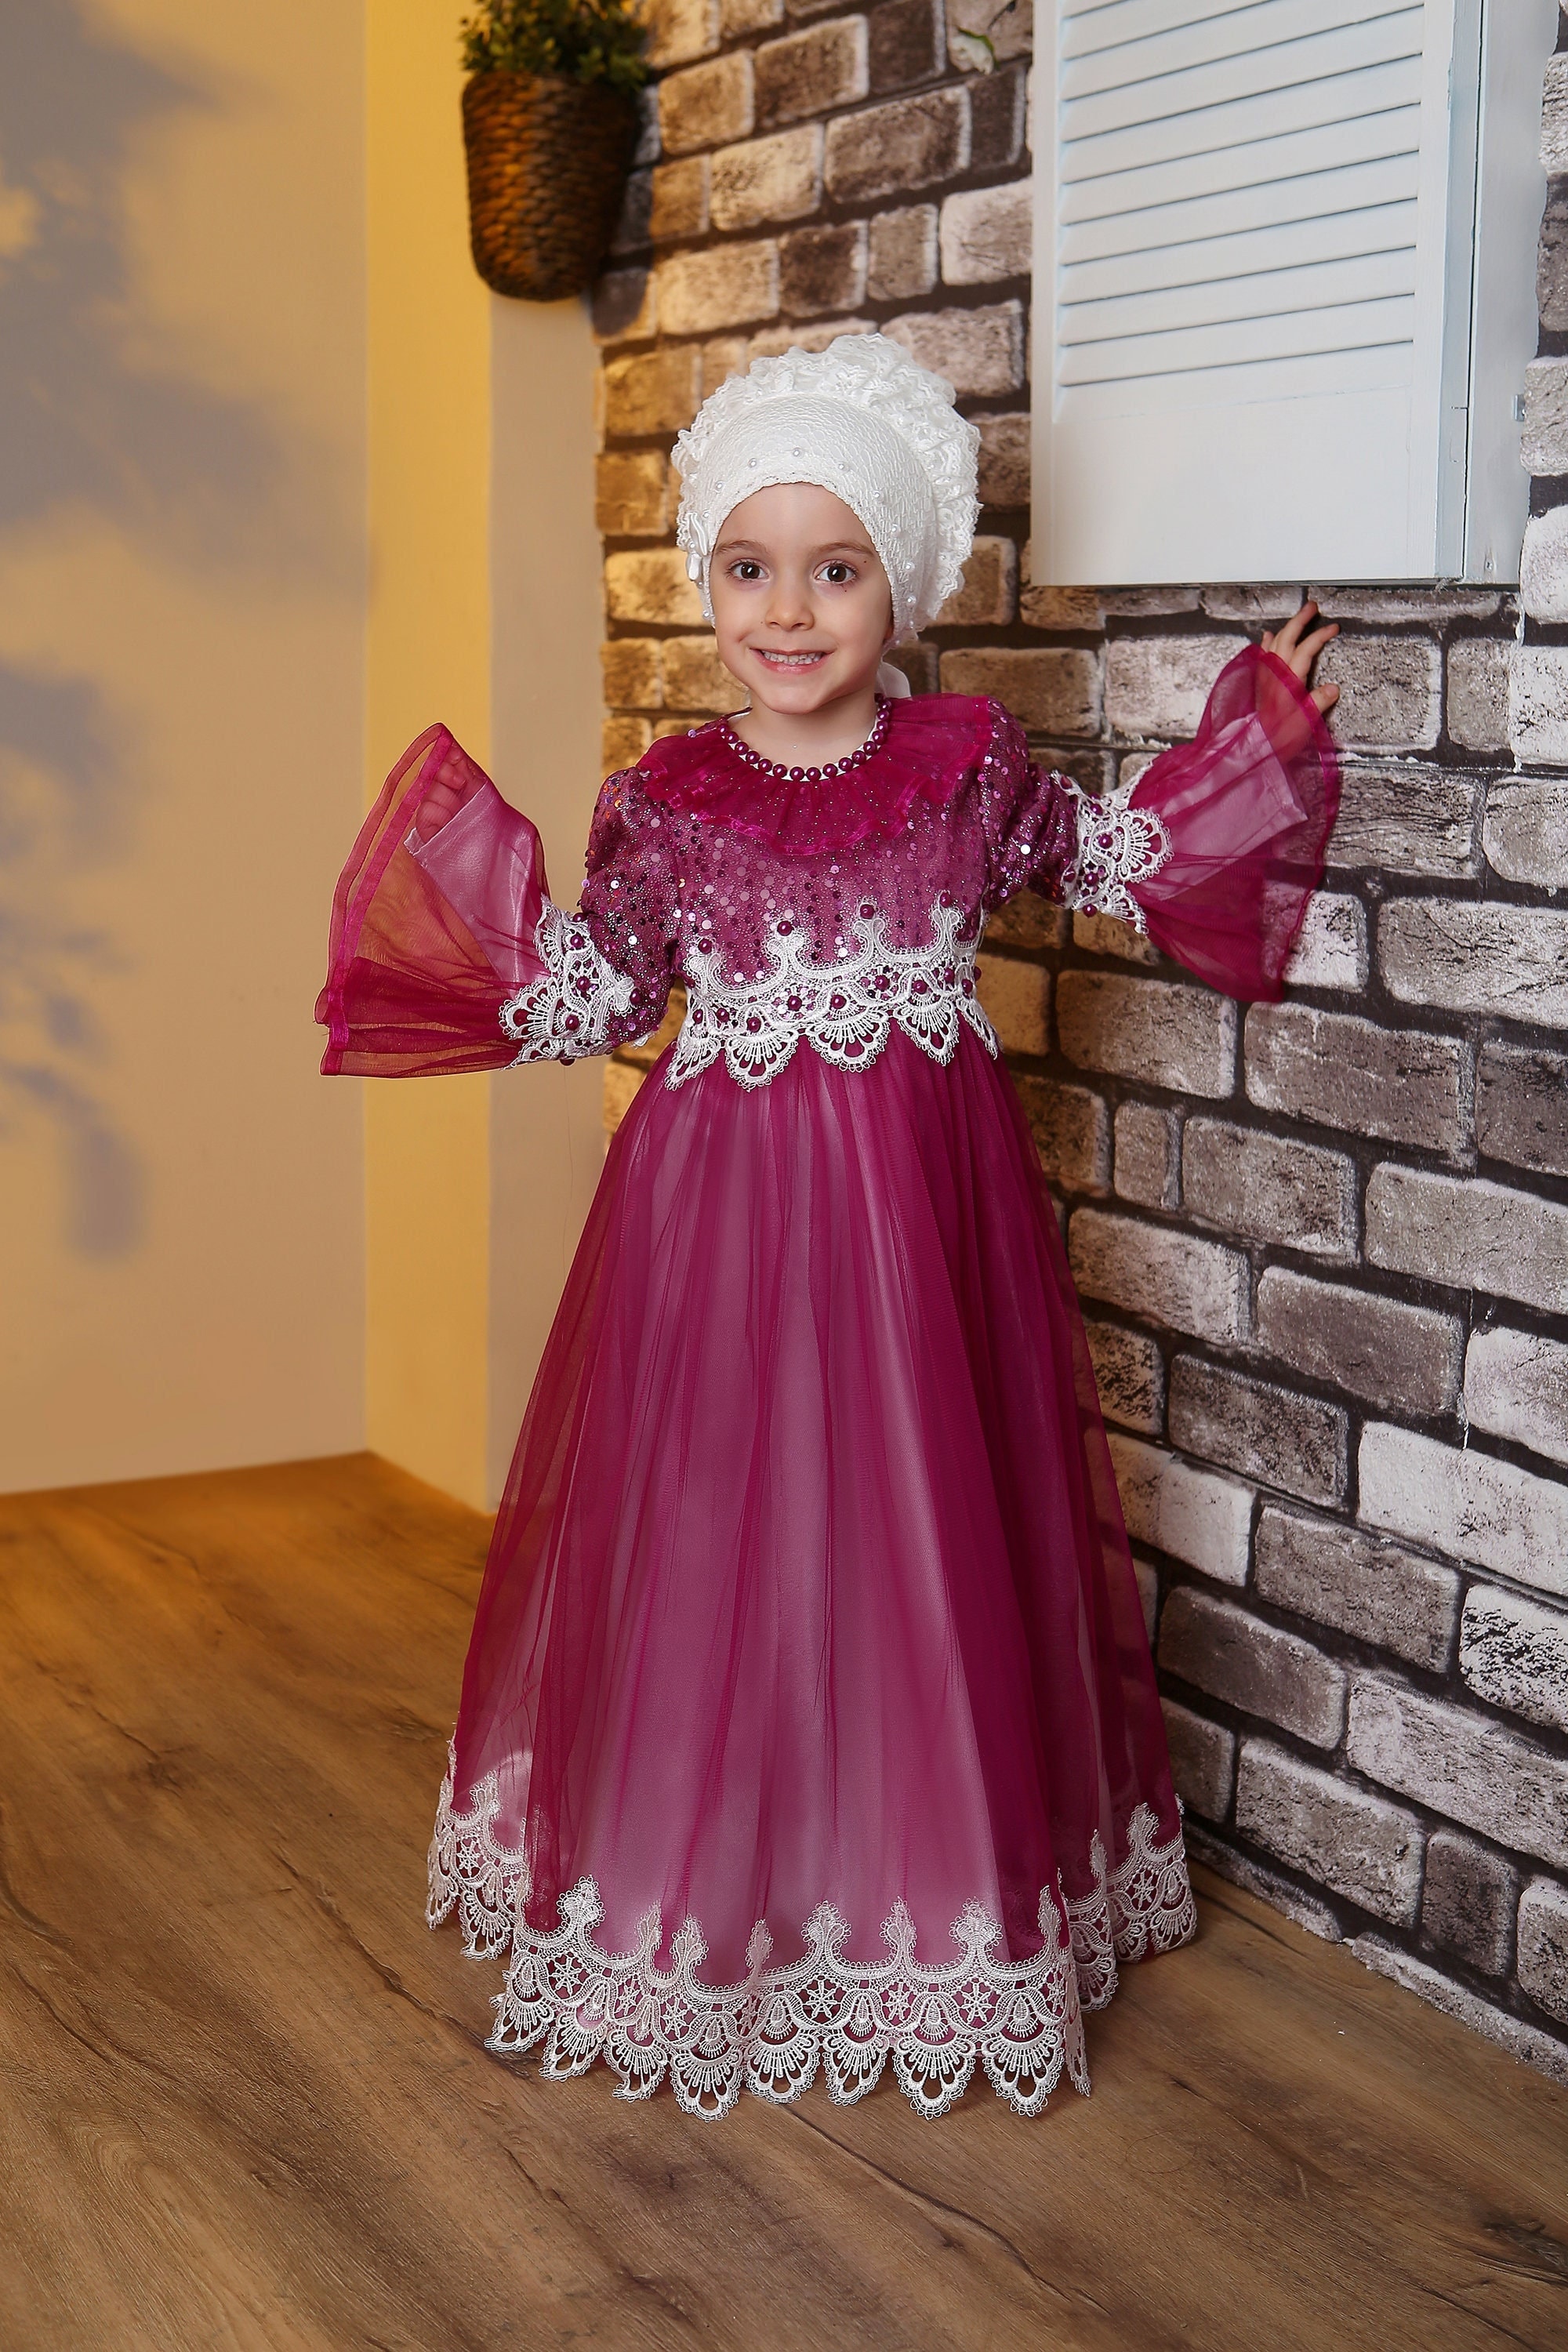 Girls Fairy Tale Gown For Wedding | Formal Party Dress For Girls